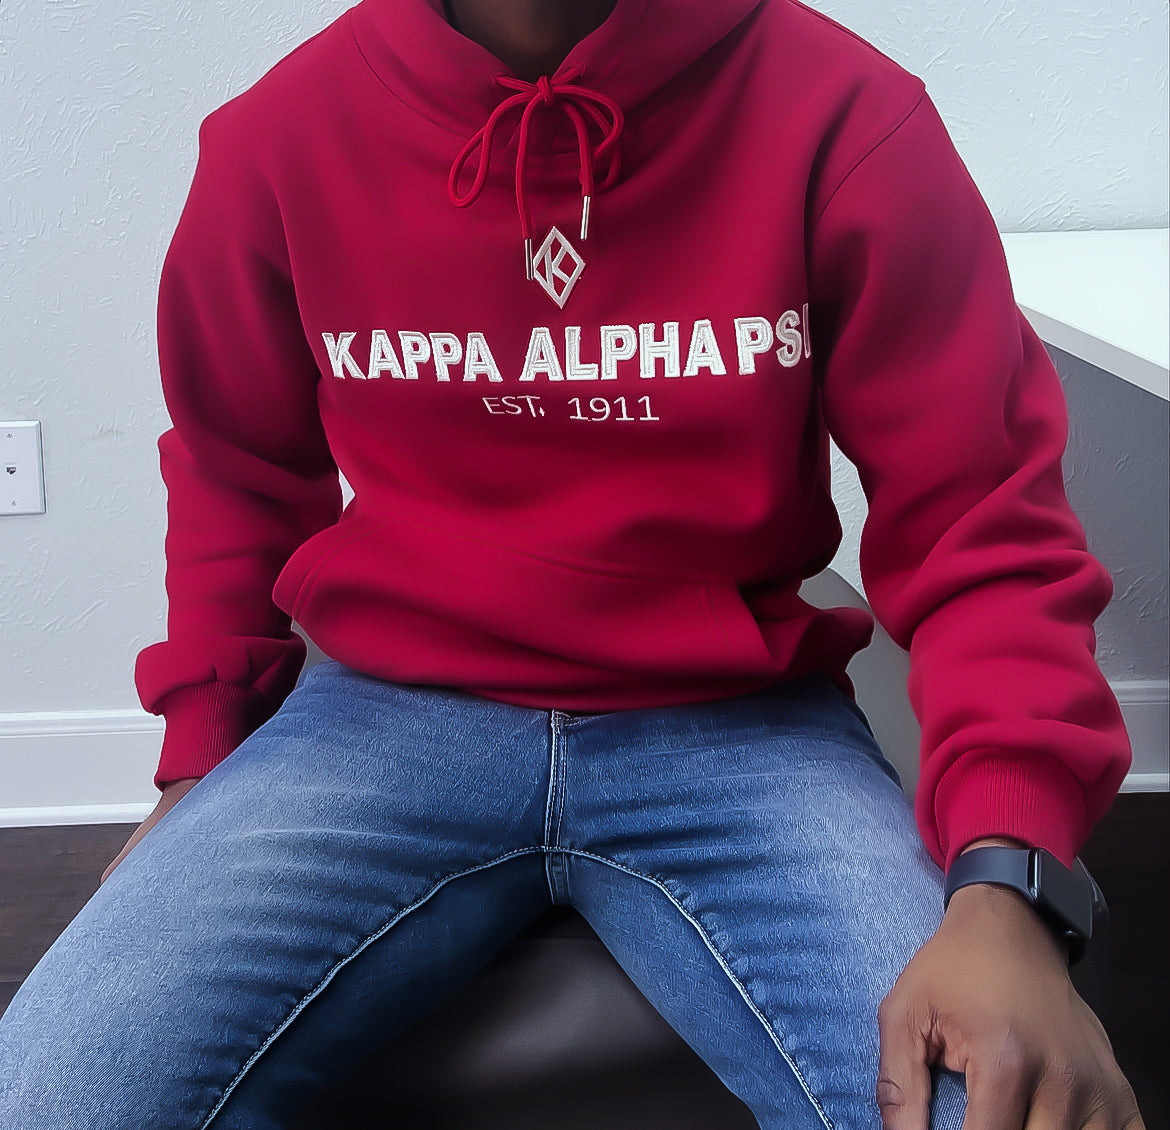 Show off your fraternity pride with this stylish dark red and cream hoodie featuring the Kappa Alpha Psi organization. Perfect for any casual occasion, this hoodie is a must-have for any fraternity member. The bold colors and recognizable logo make a statement while providing comfortable warmth. Represent your organization with pride and stay cozy in this must-have hoodie.
